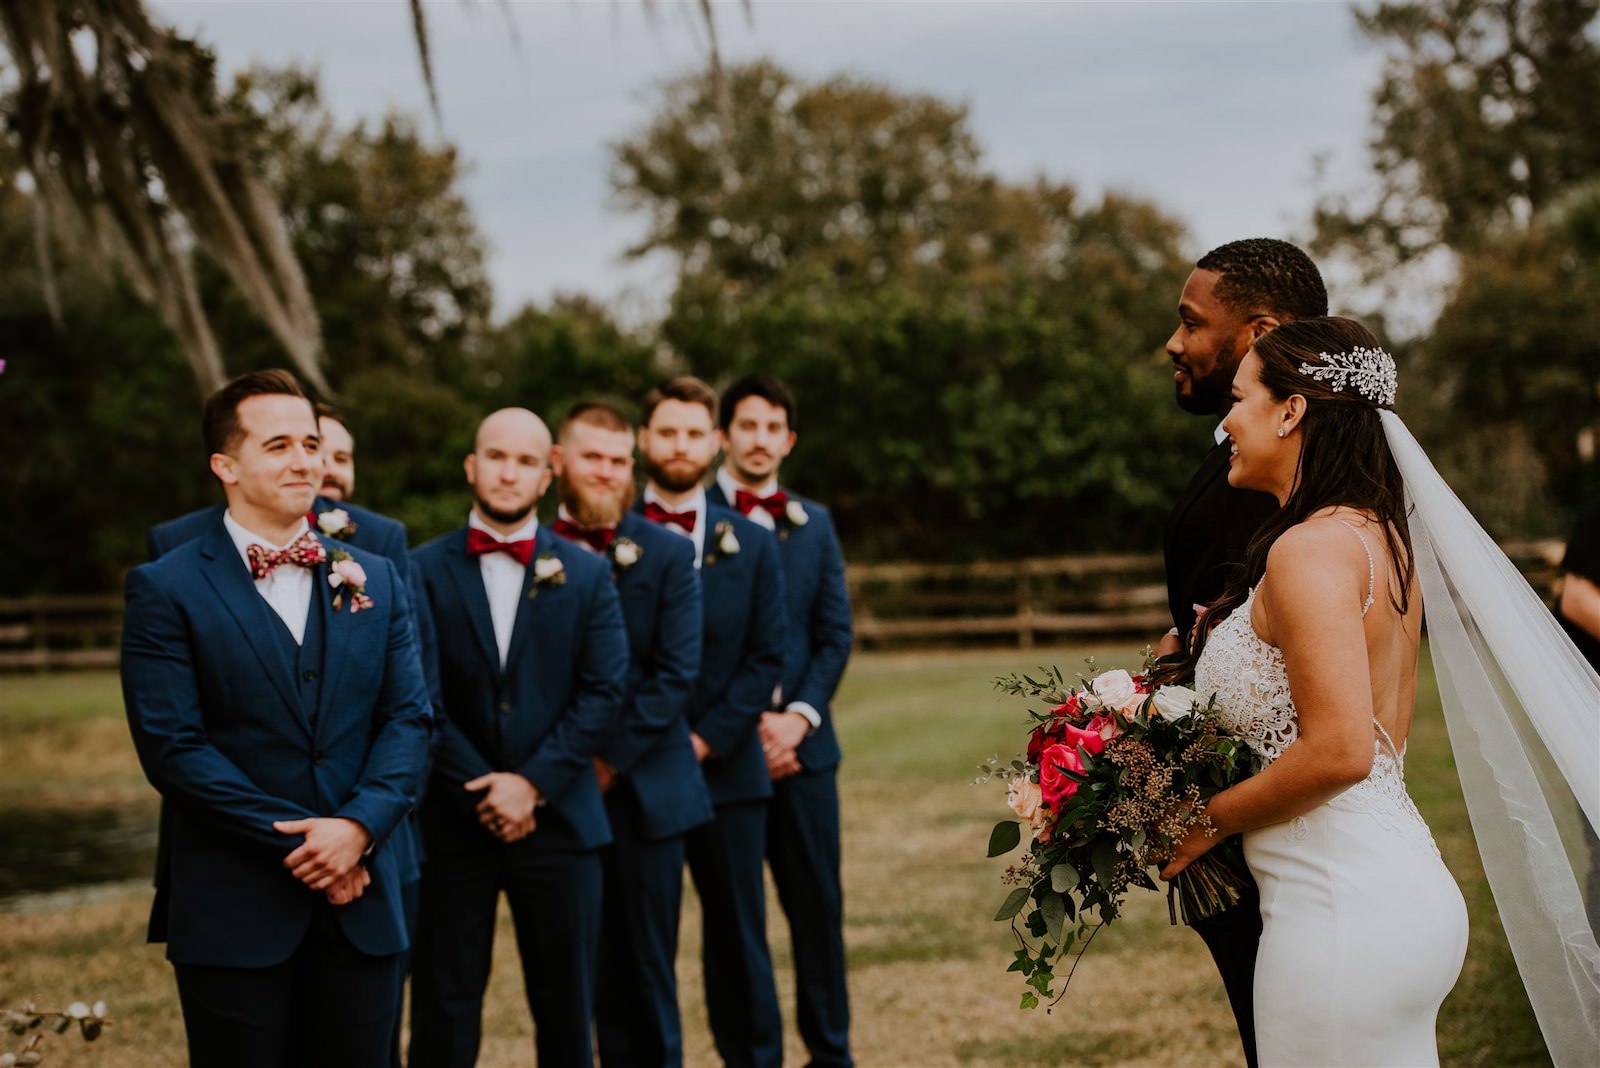 Bride Walking Down Aisle with Father during Outdoor Rustic Tampa Wedding | Groom and Groomsmen Wearing Navy Blue Suits with Red Bow Ties